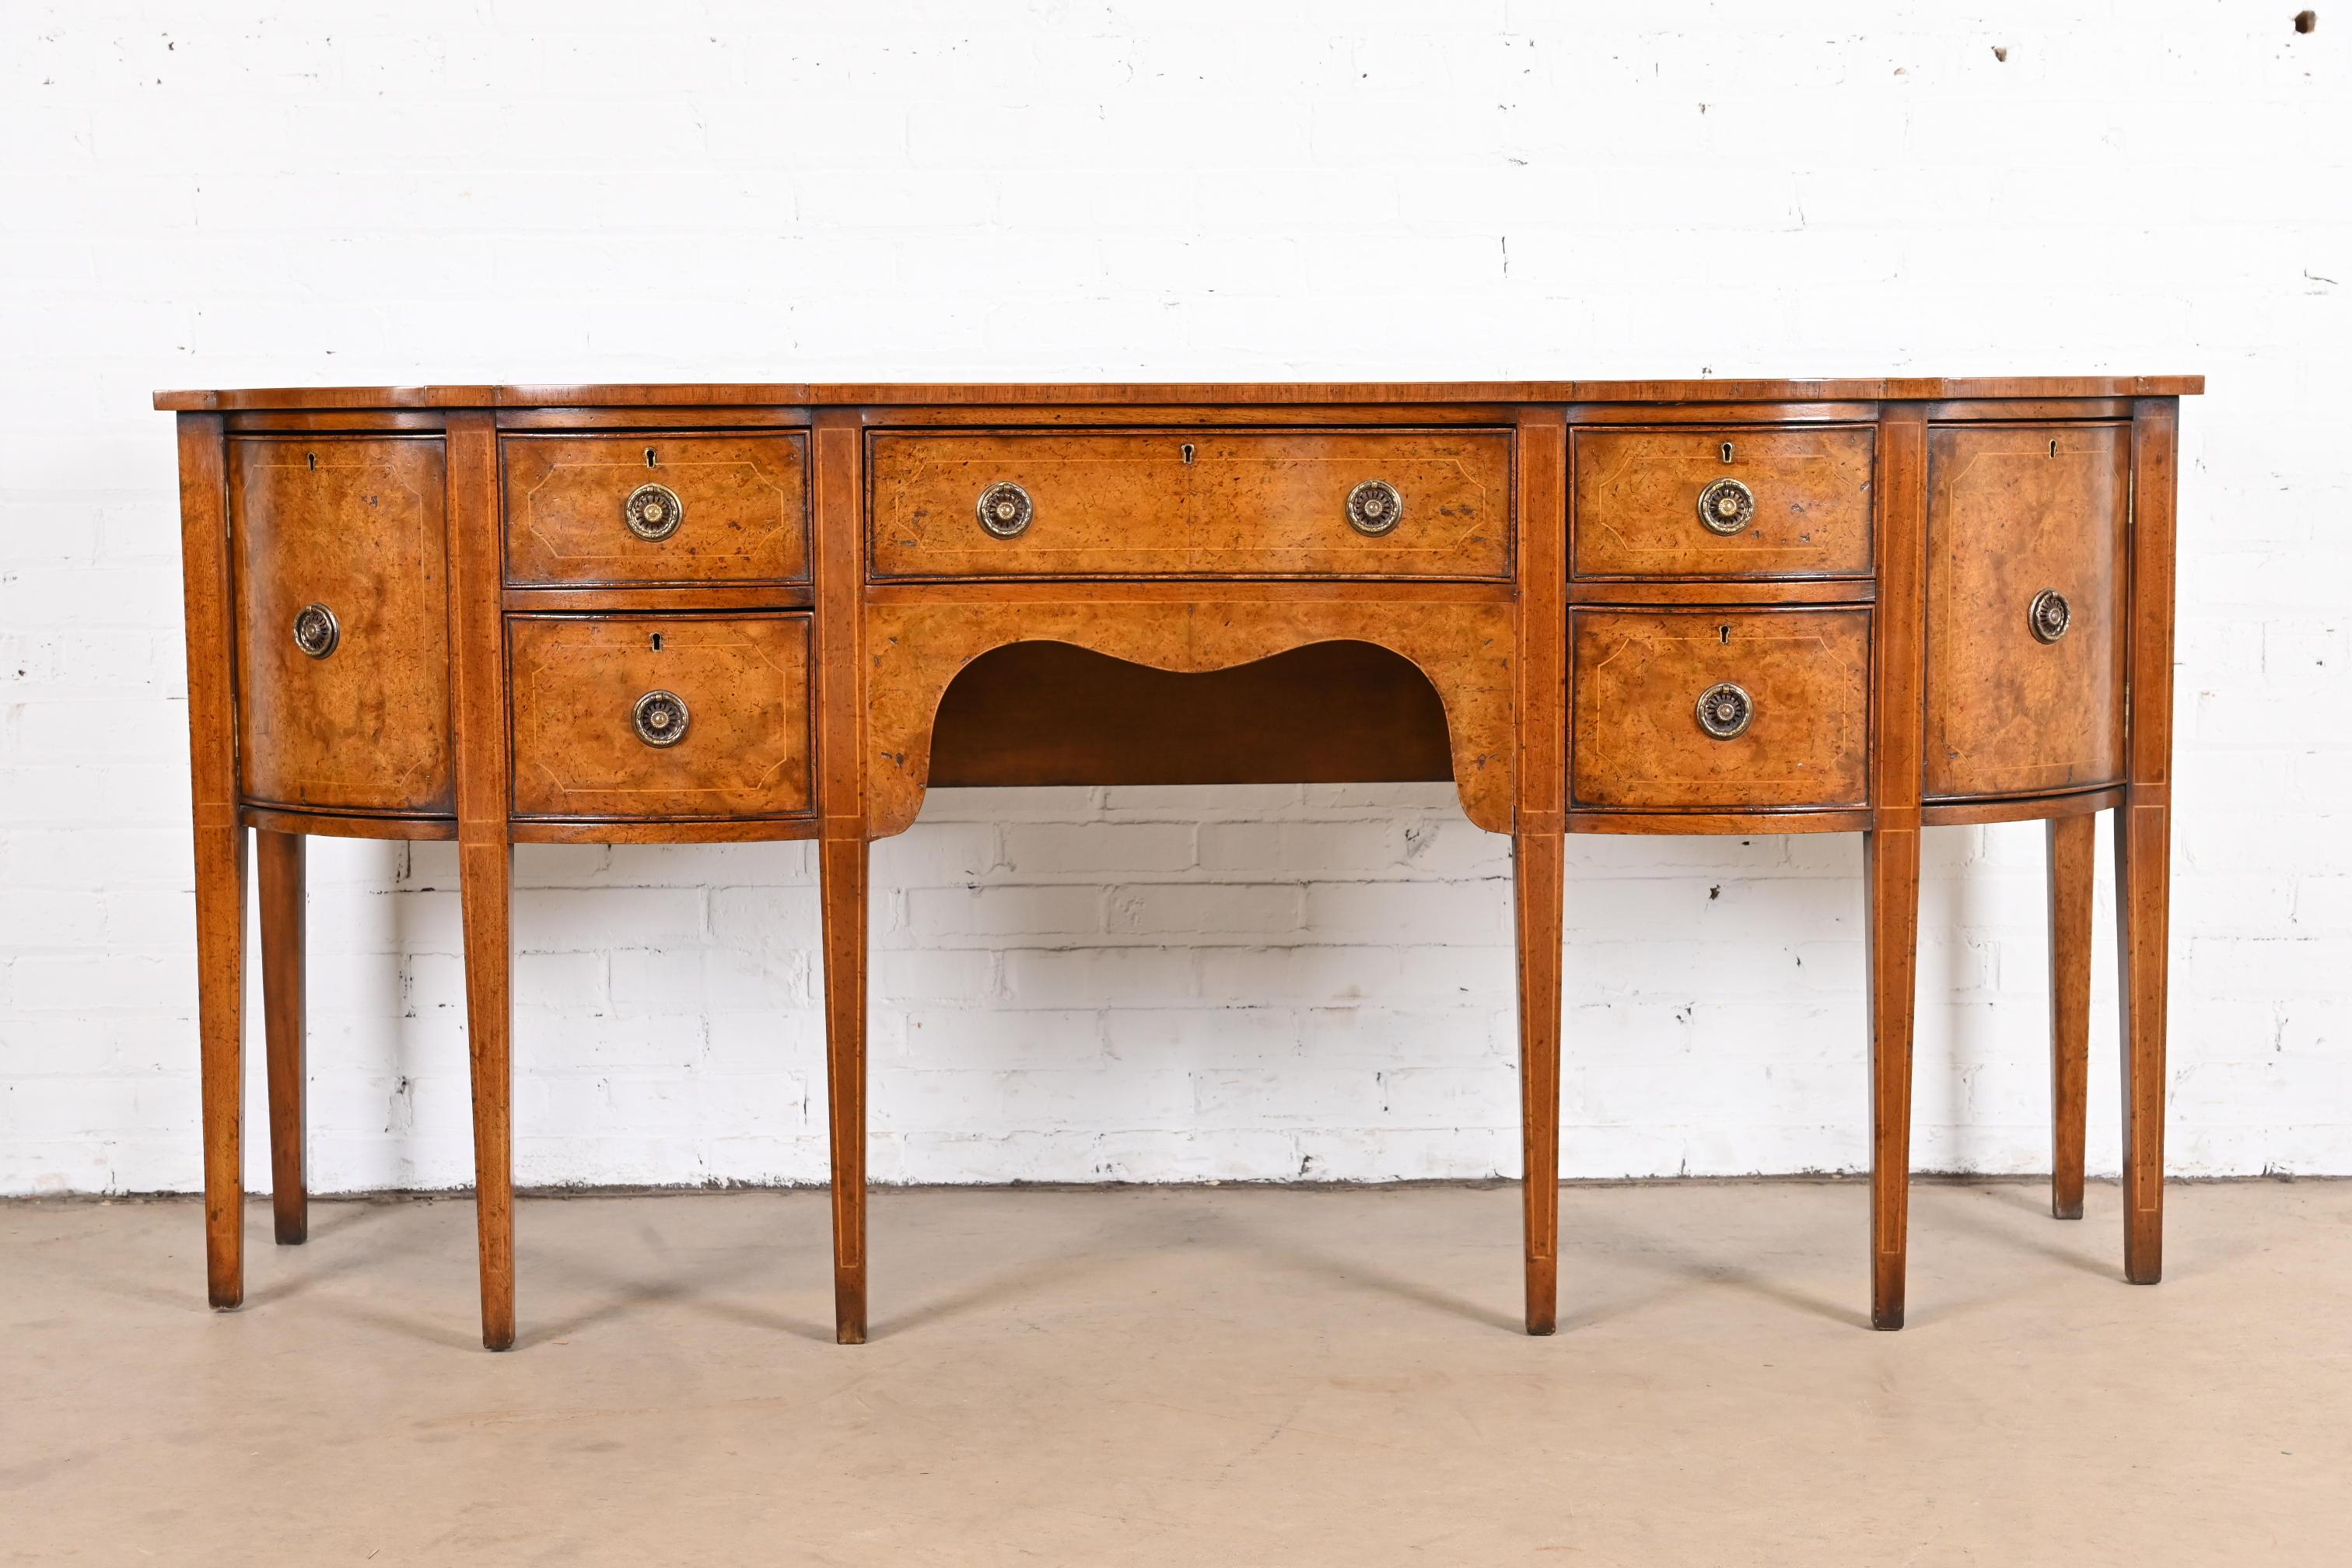 A gorgeous antique Georgian or Hepplewhite style double serpentine sideboard or credenza

In the manner of Baker Furniture

USA, circa 1930s

Beautiful burled walnut, with satinwood string inlay, and original brass hardware.

Measures: